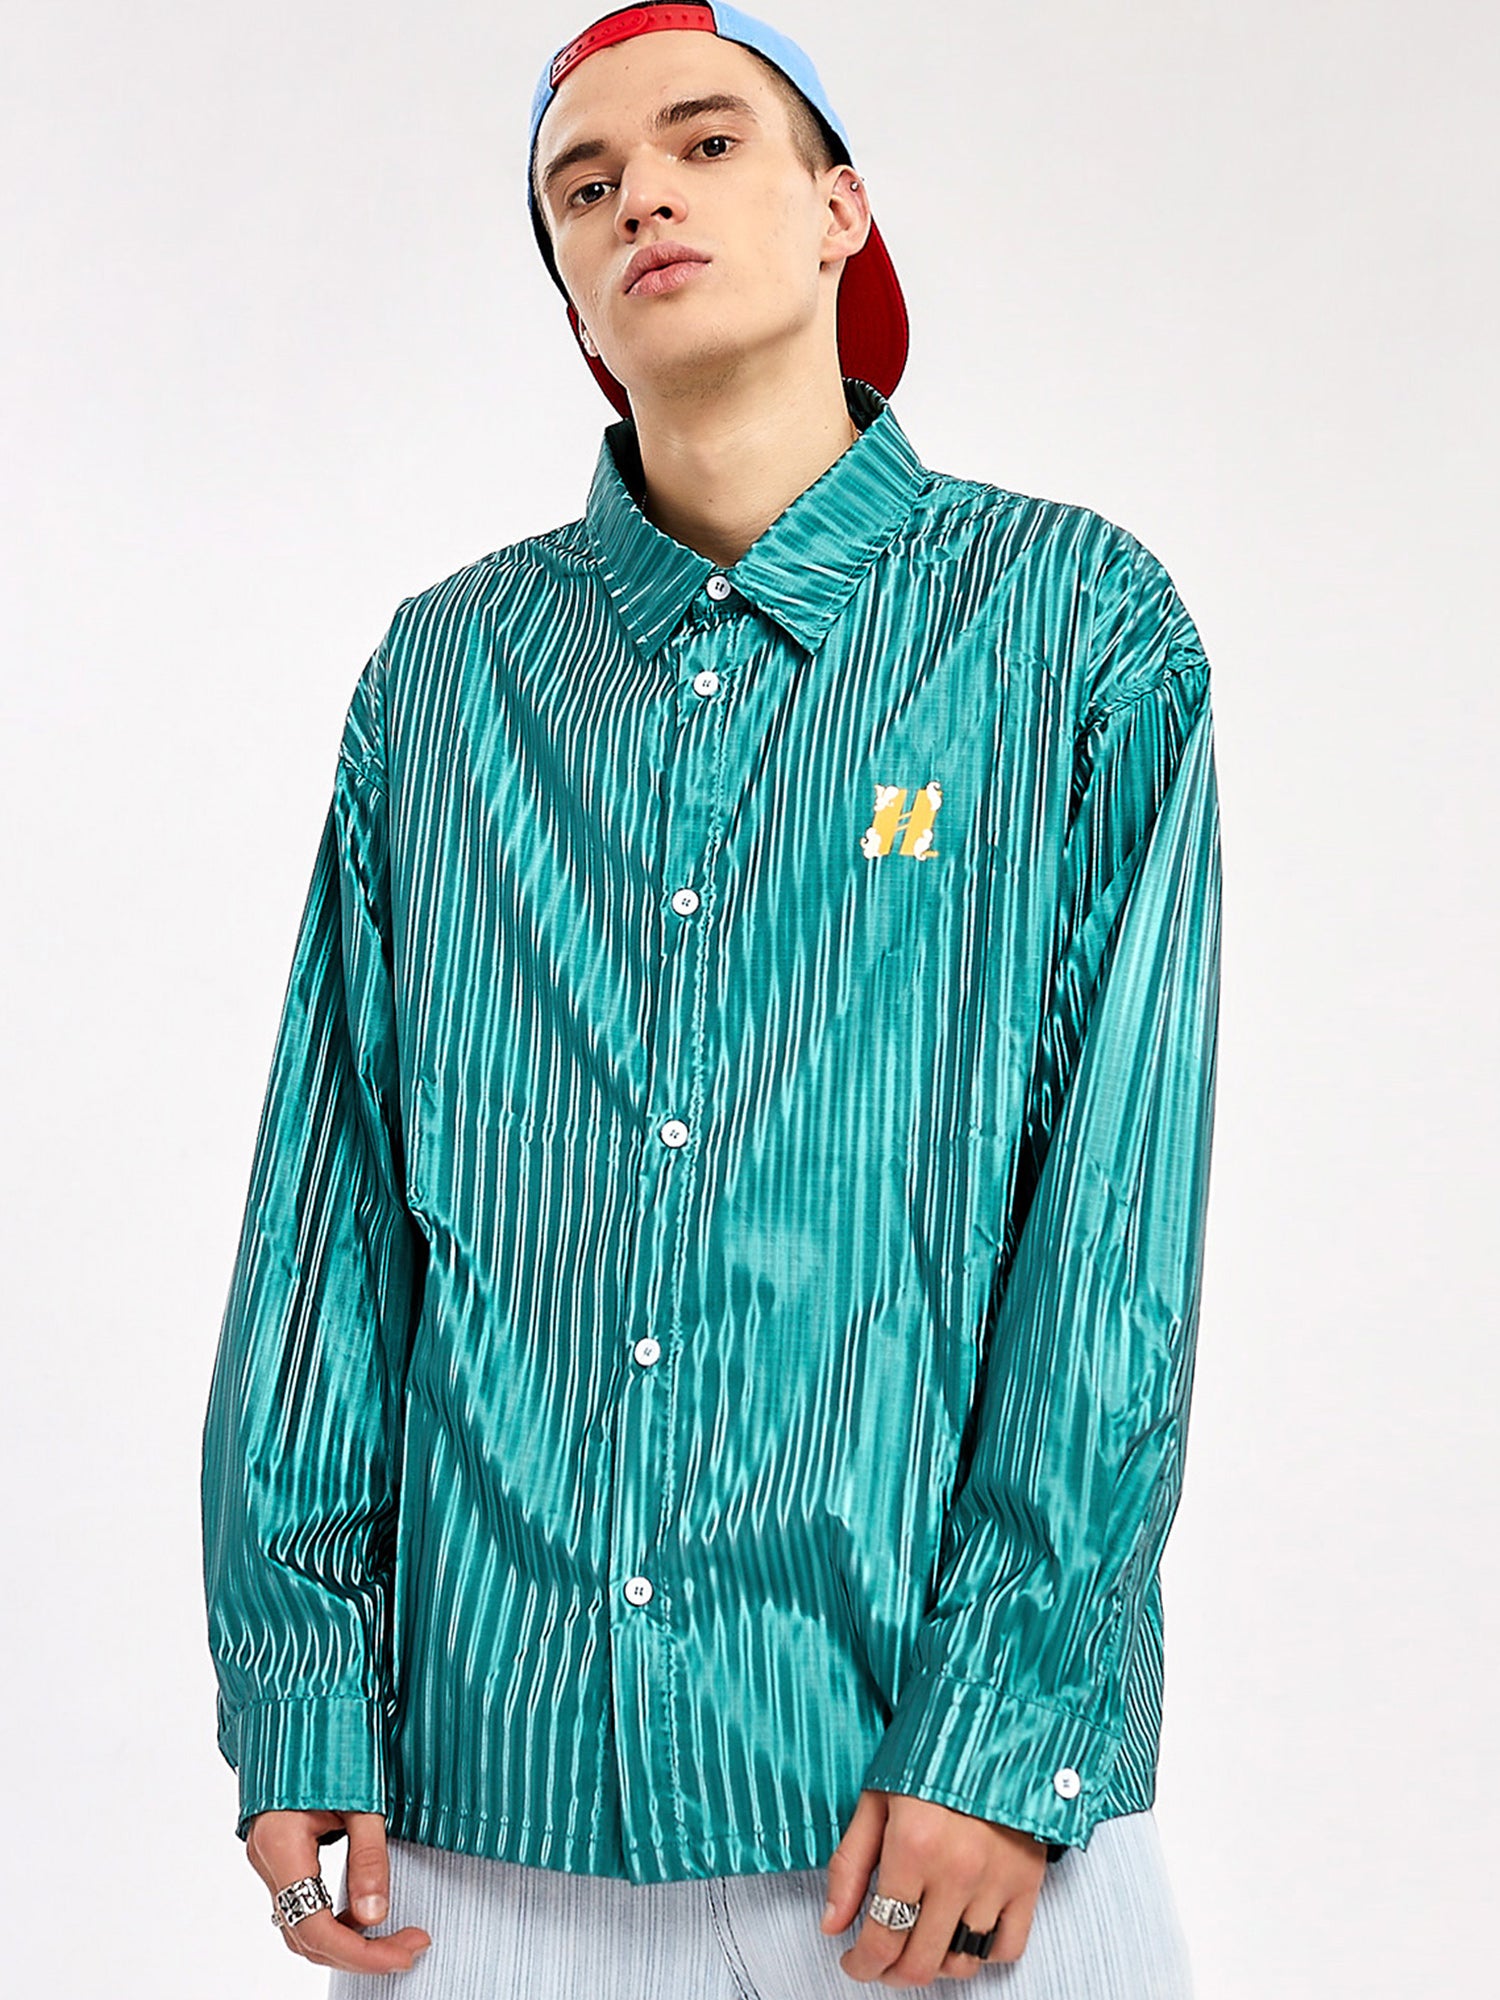 JUSTNOTAG Street Fashion Hiphop Striped Polyester Turn-down Collar Green Shirts